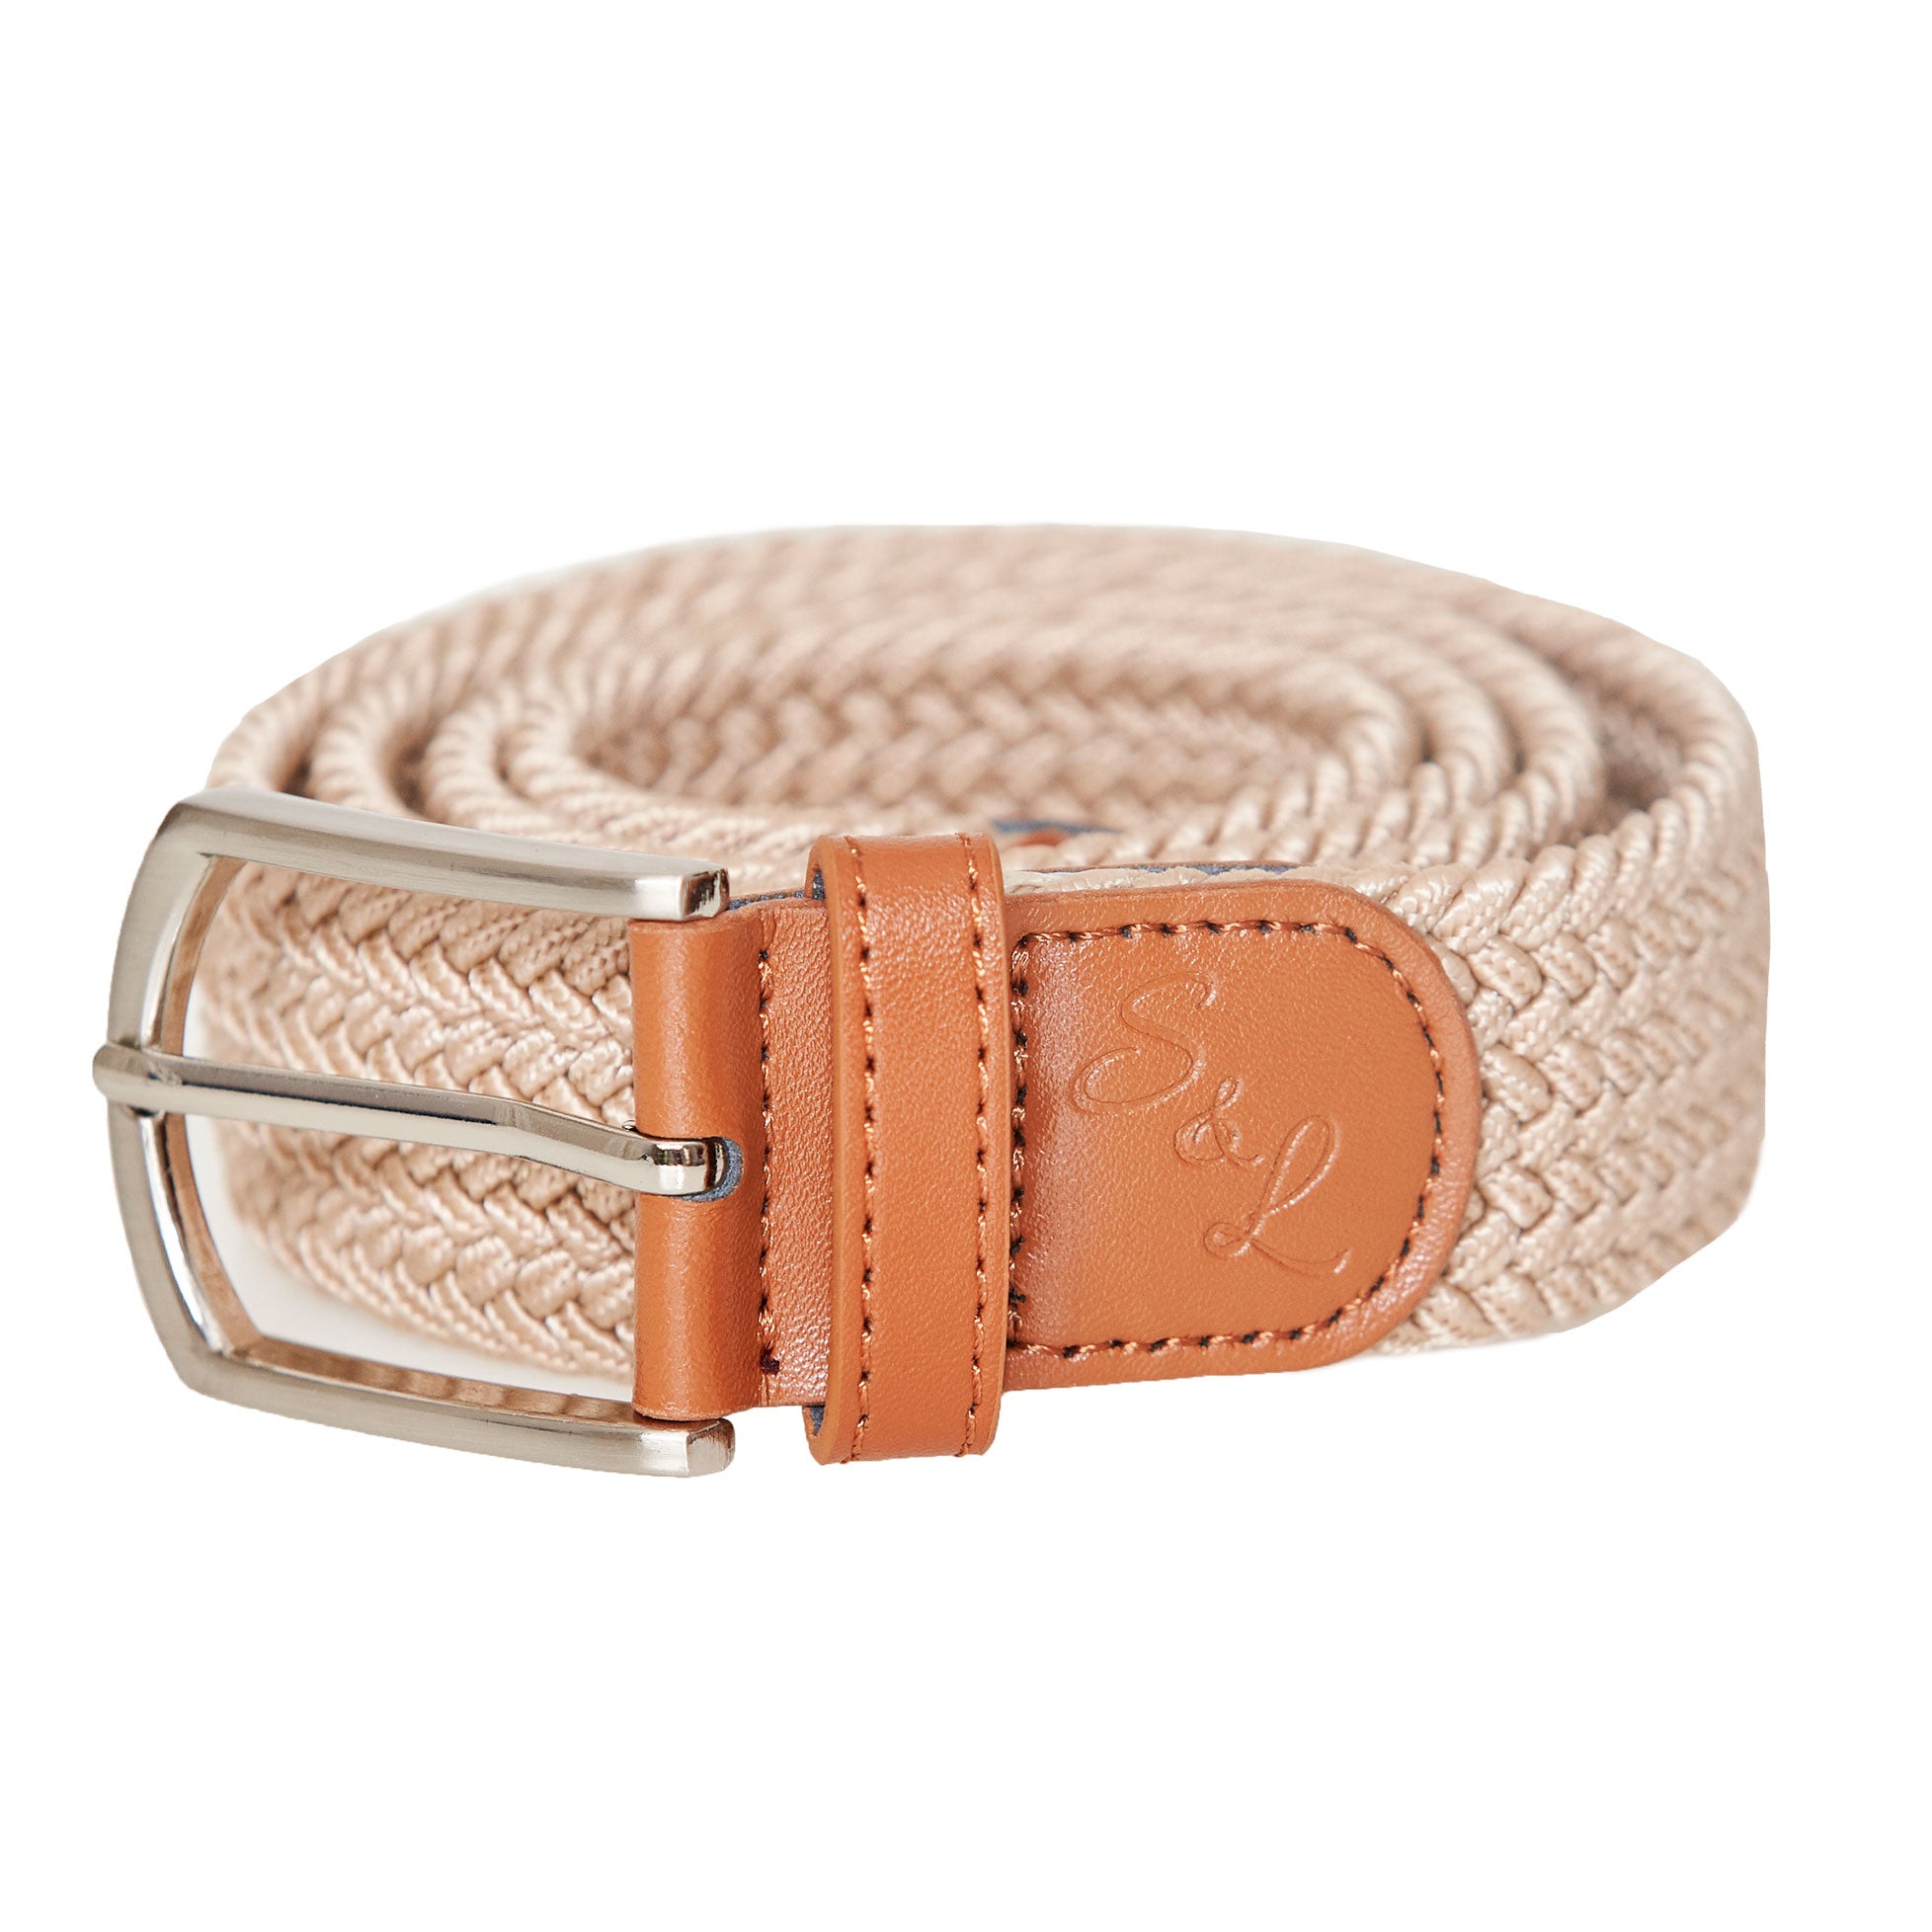 Casual Stretch Belt - Brown - State and Liberty Clothing Company Canada